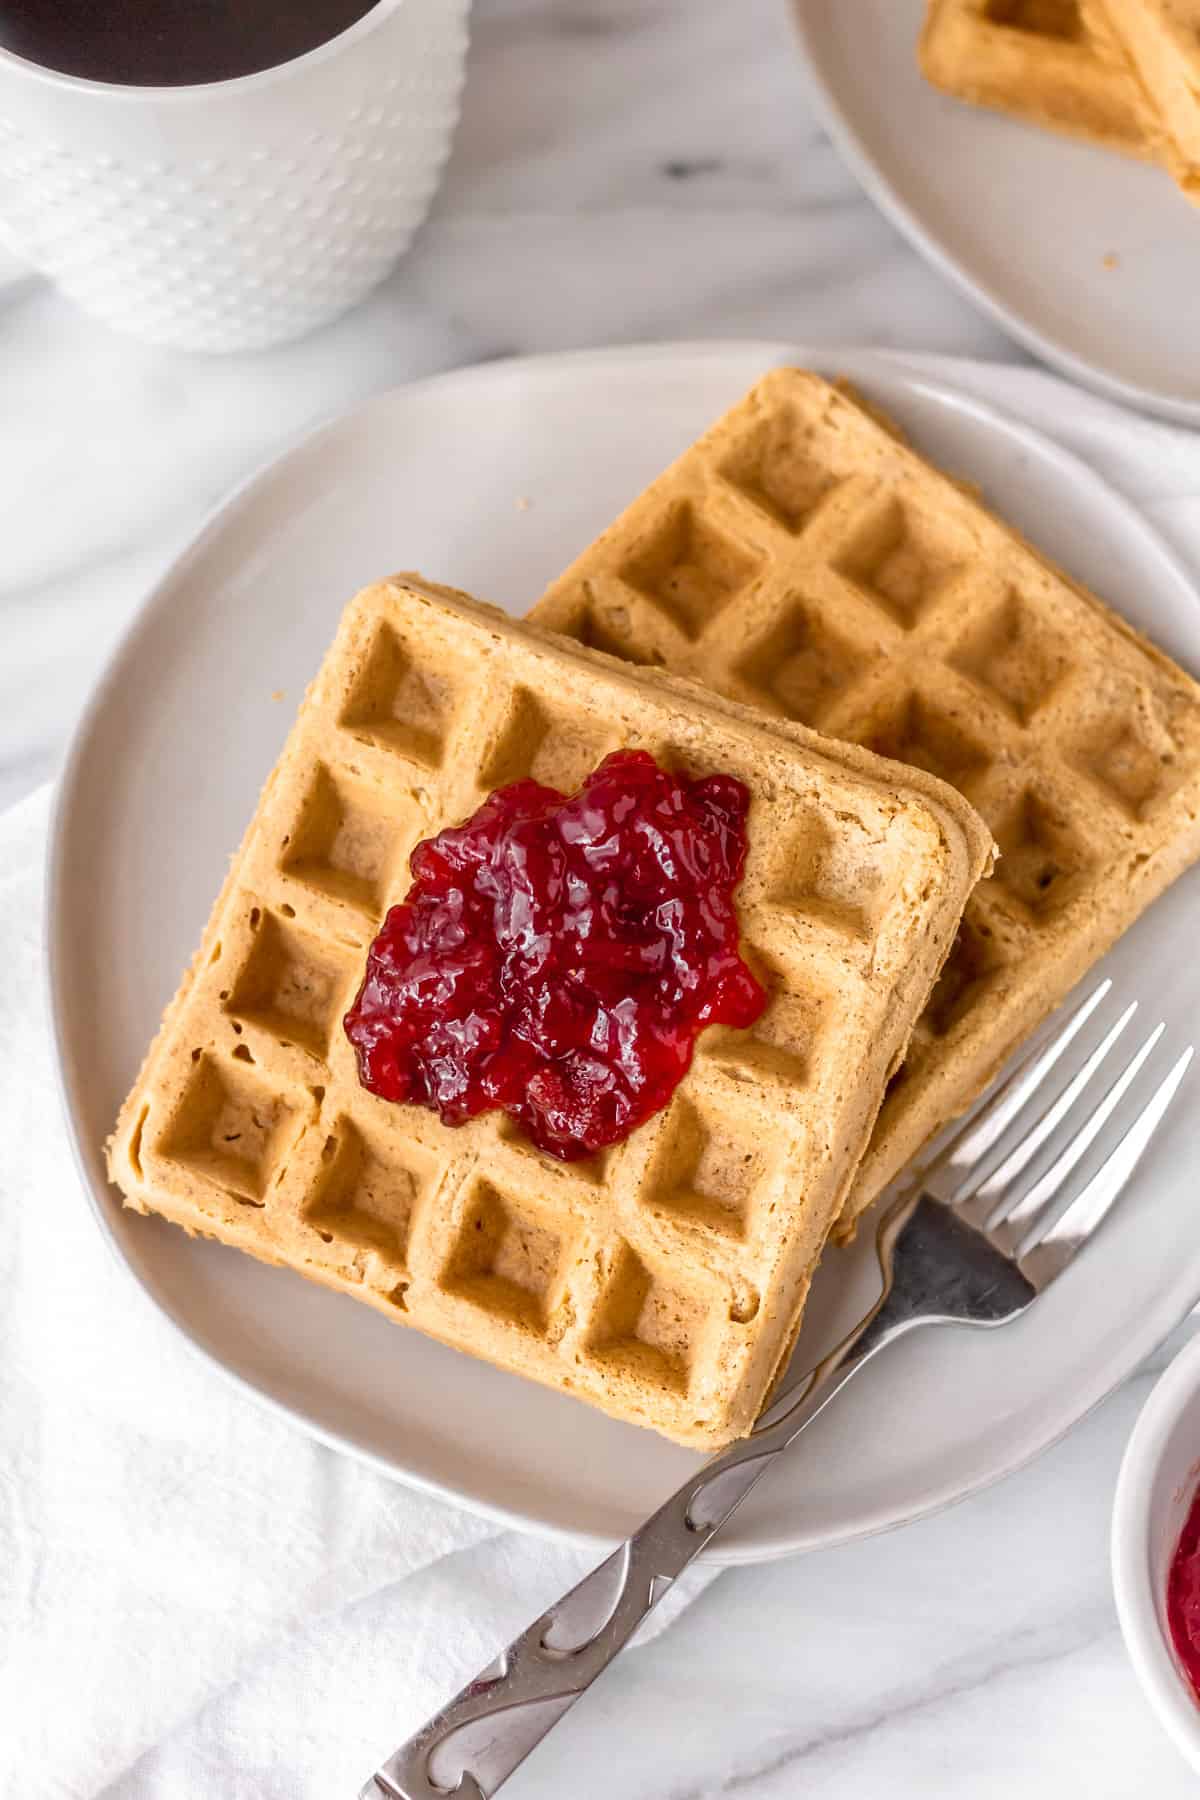 CLose up of two gluten free peanut butter waffles on a plate with a fork.